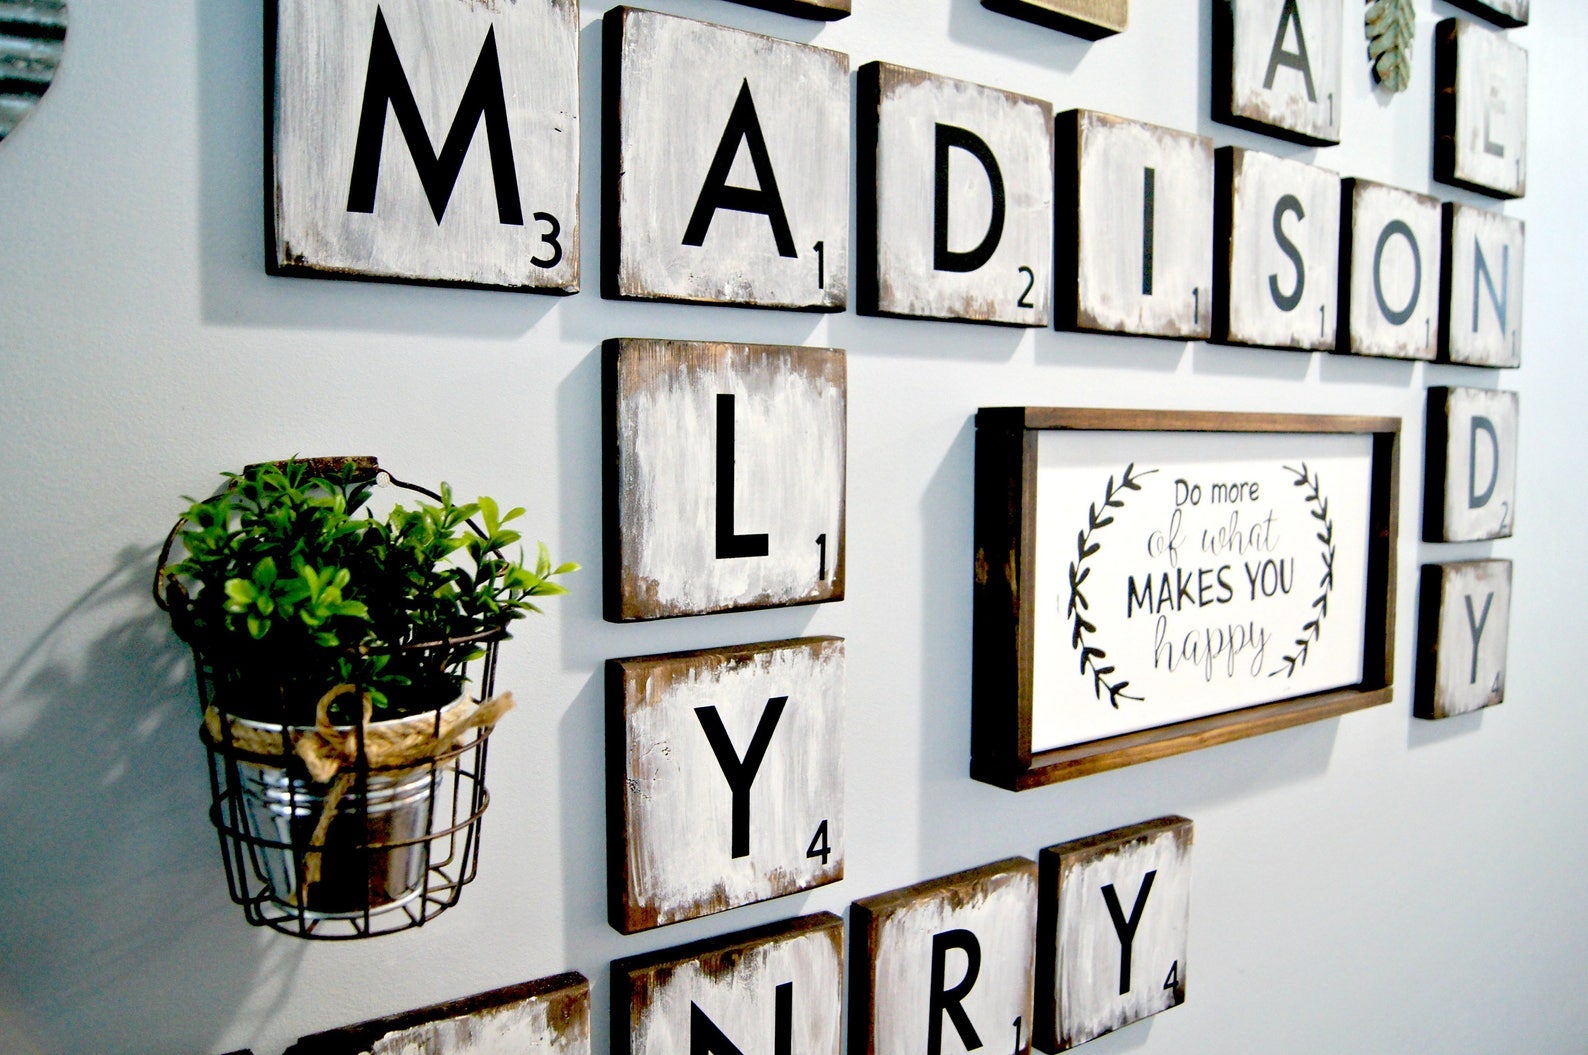 Wall with large Scrabble-style tile squares as wall decor